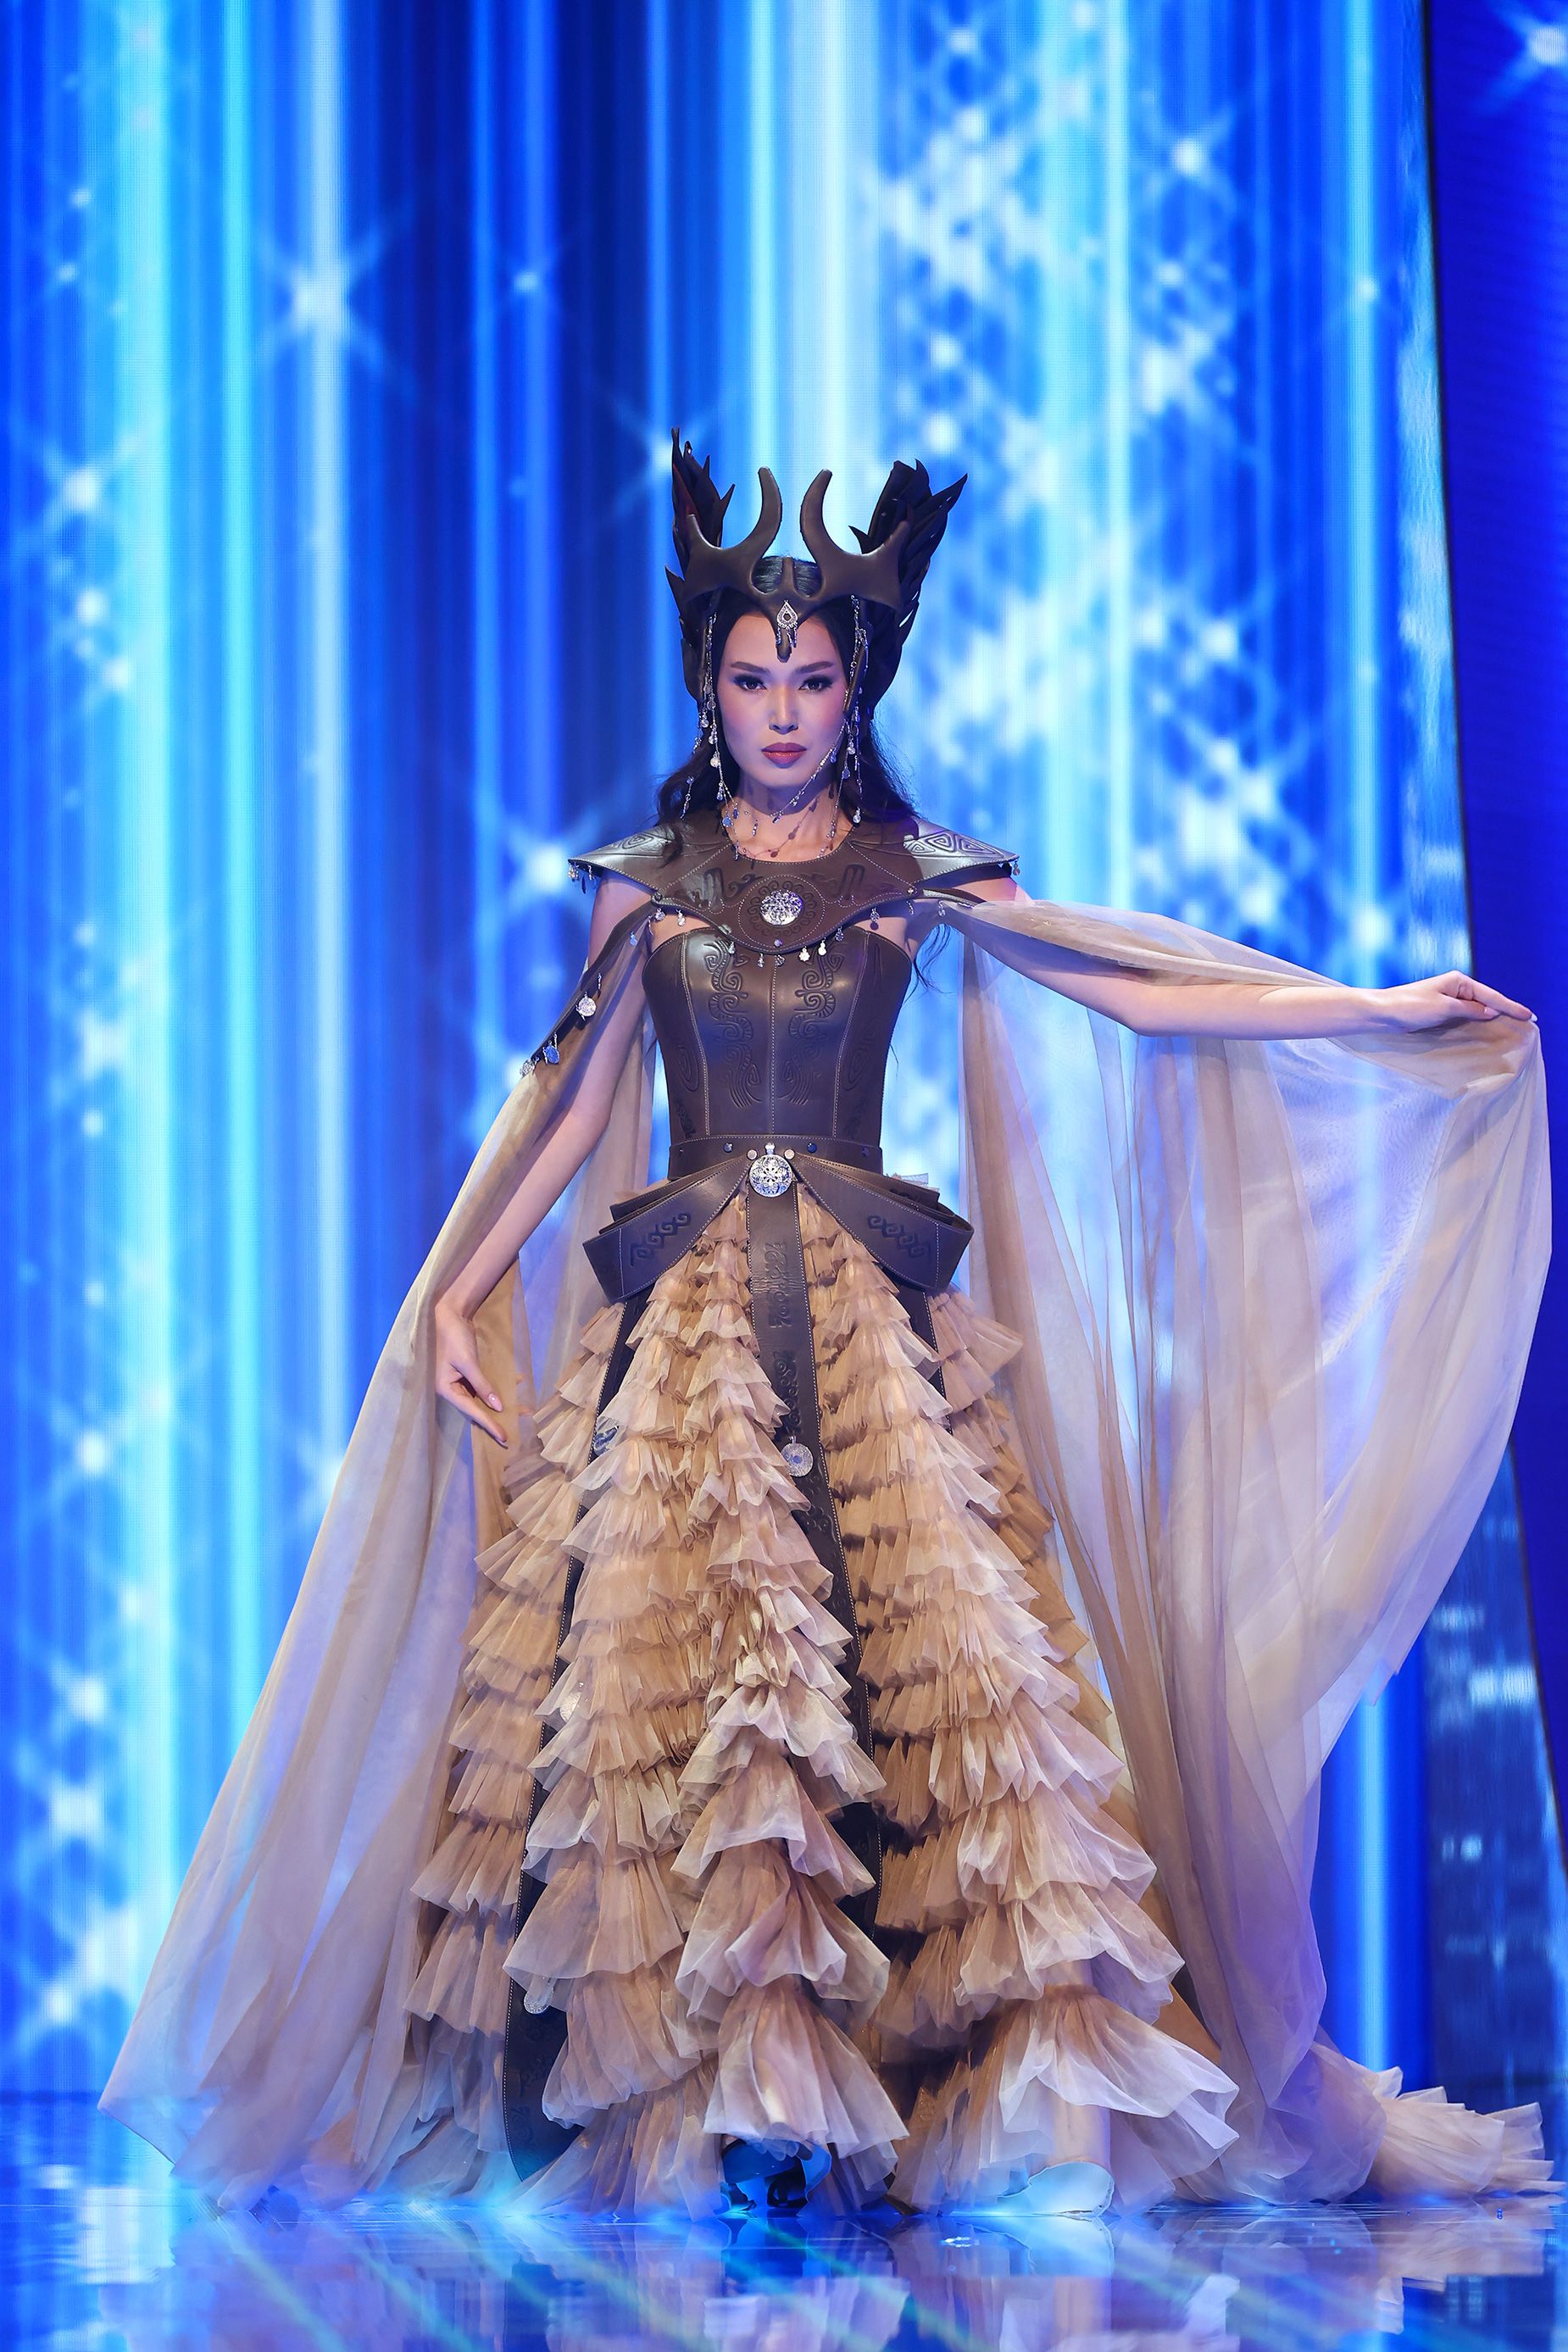 Miss Kazakhstan, meanwhile, dressed up as the ancient warrior queen Tomyris in a gown that balanced sculptural leather corsetry and a dramatic headpiece with delicate ruffles and a sheer cape.